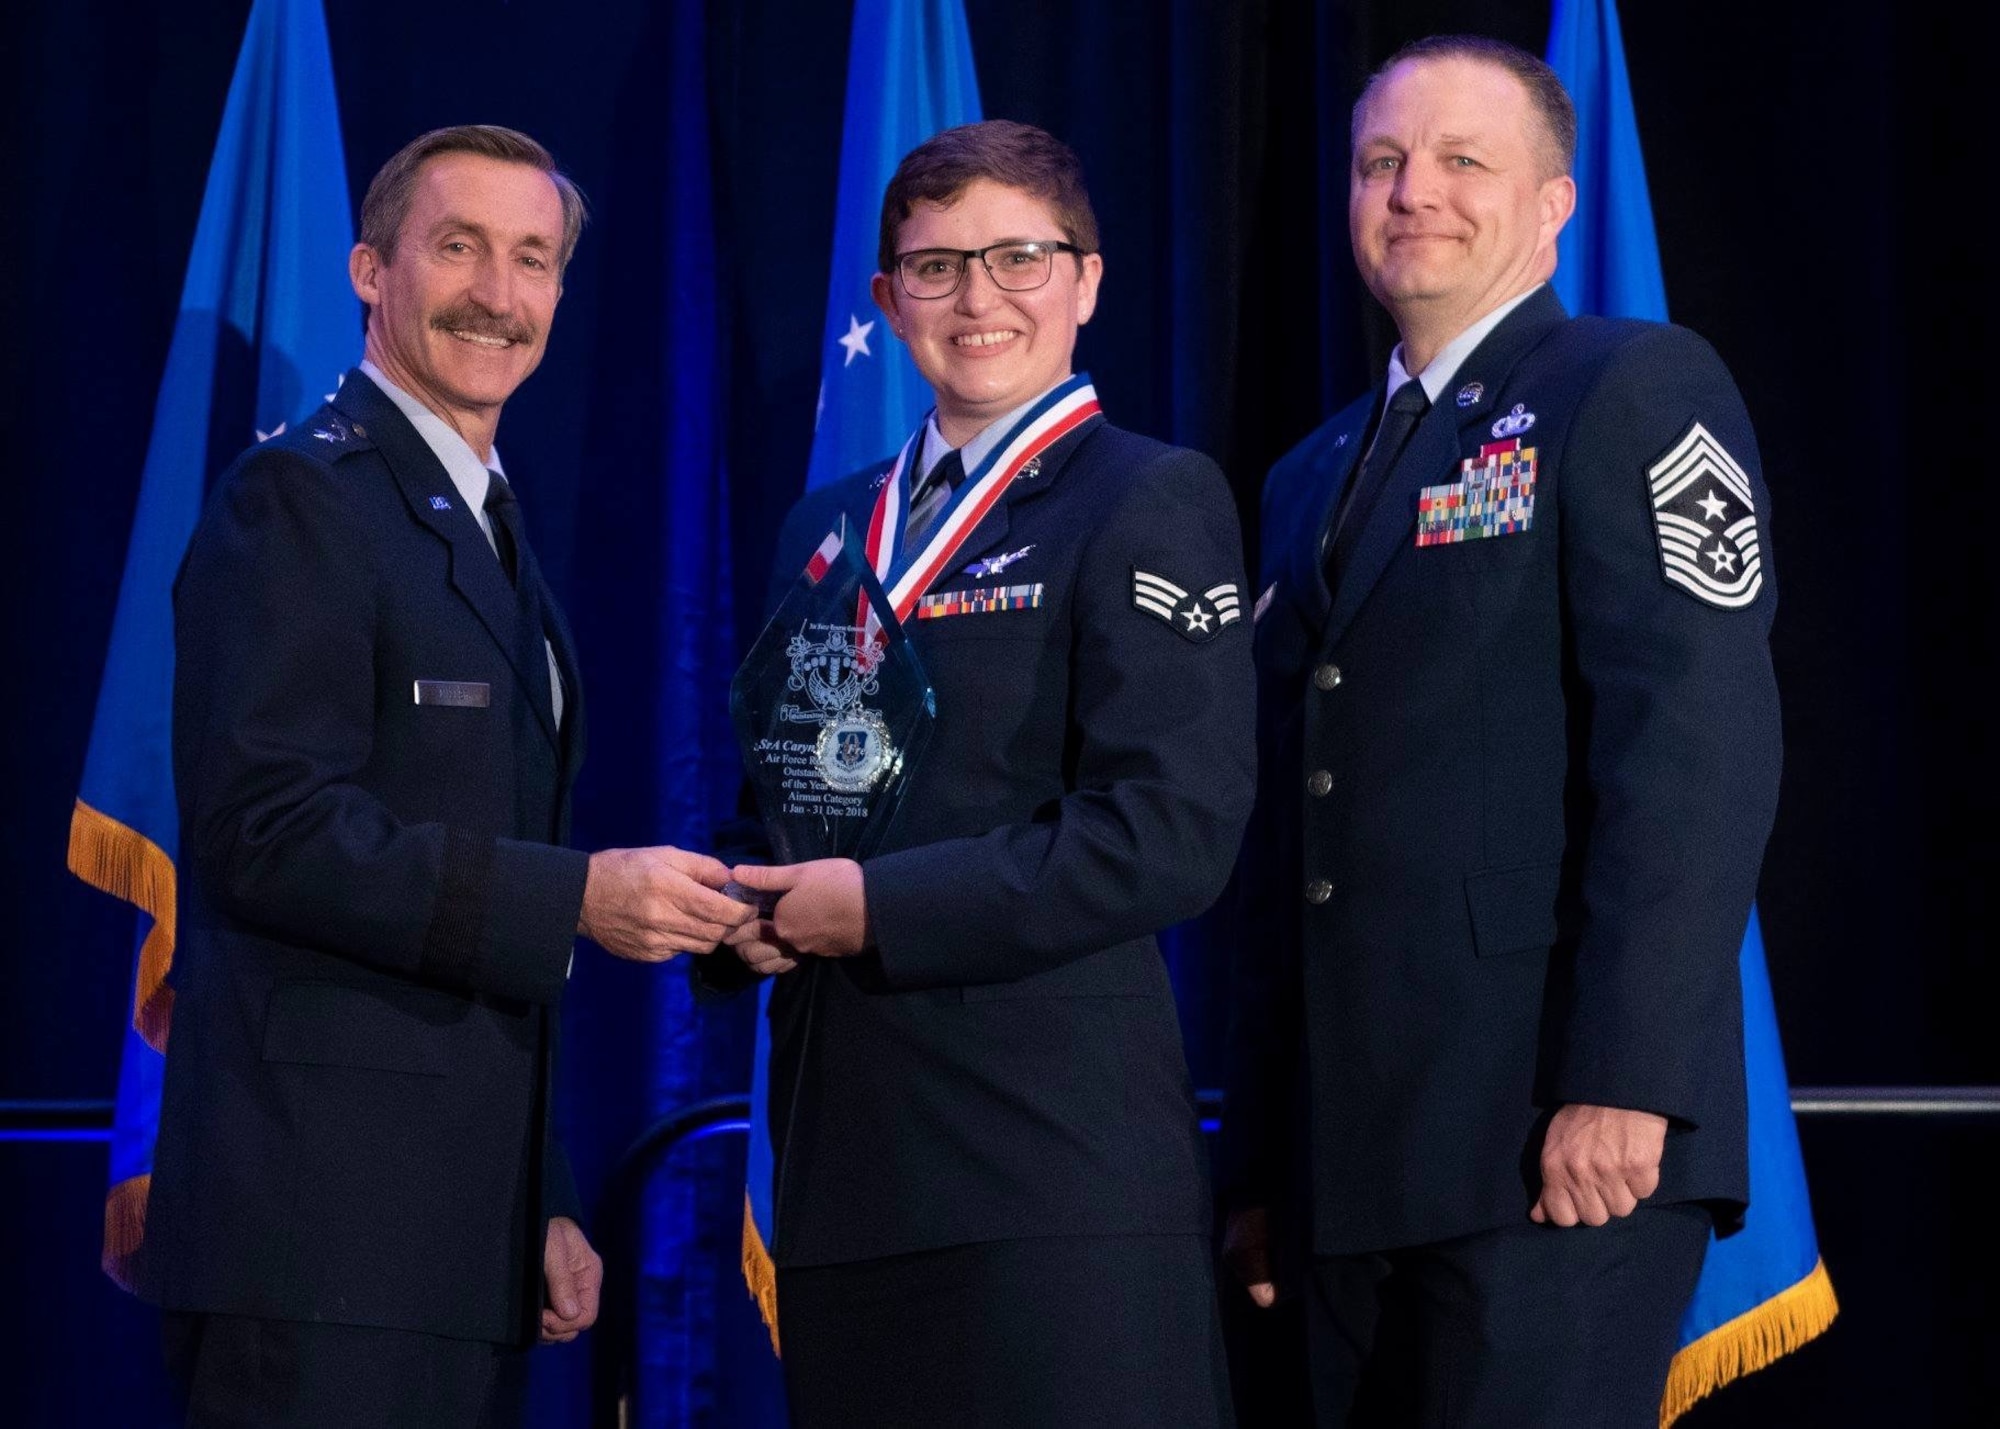 Then Senior Airman Caryn Frederick, 19th Space Operations Squadron technician, is recognized as the 2018 12 Outstanding Airman of the Year Award, Airman category for the Air Force Reserve Command in St. Augustine, Florida, March 27, 2019. Frederick said her team at Schriever Air Force Base helped push her to win this award. (U.S. Air Force courtesy photo)